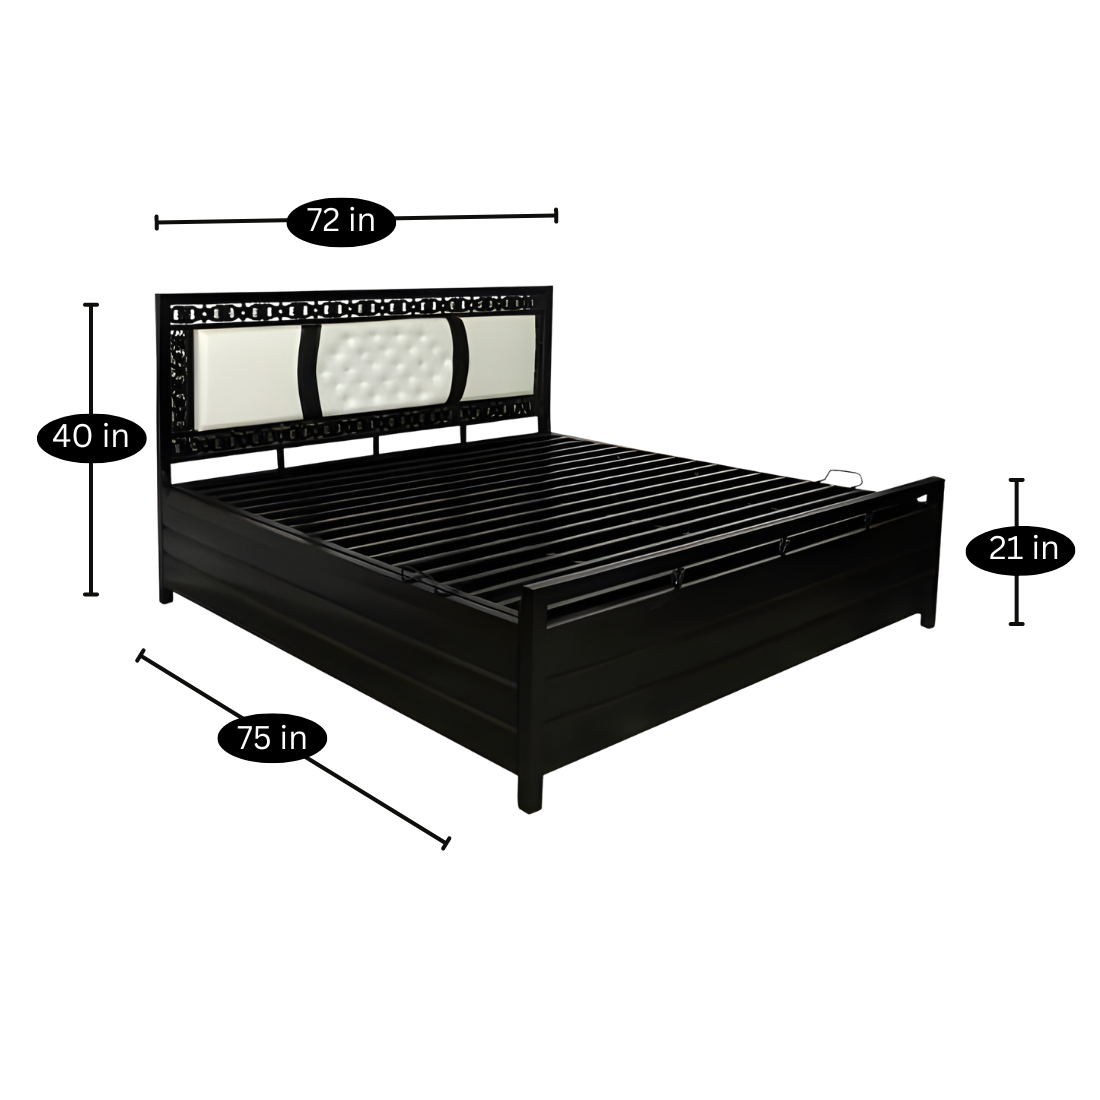 Bostan Hydraulic Storage King Metal Bed with White Cushion Headrest (Color - Black)